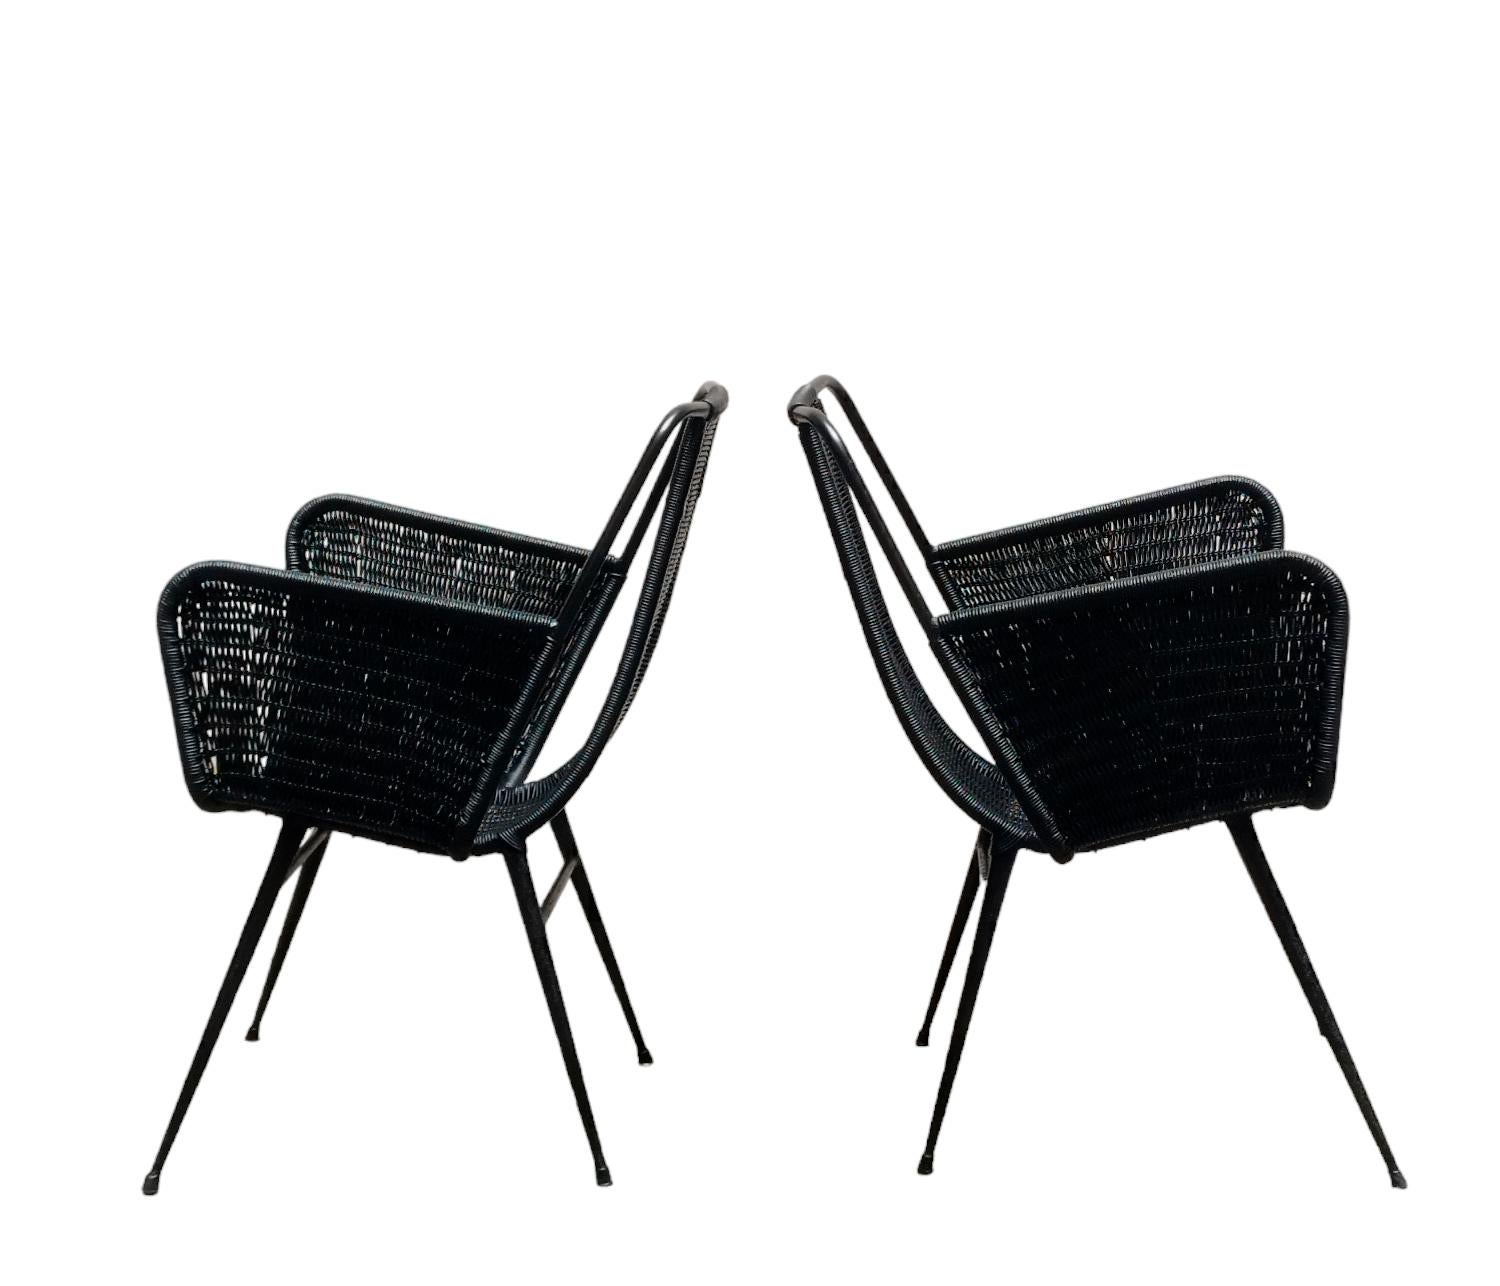 Pair of Outdoor Armchairs in black woven plastic, Designer Gastone Rinaldi, Production Rima, Italy circa 1960. The chairs have been repainted.